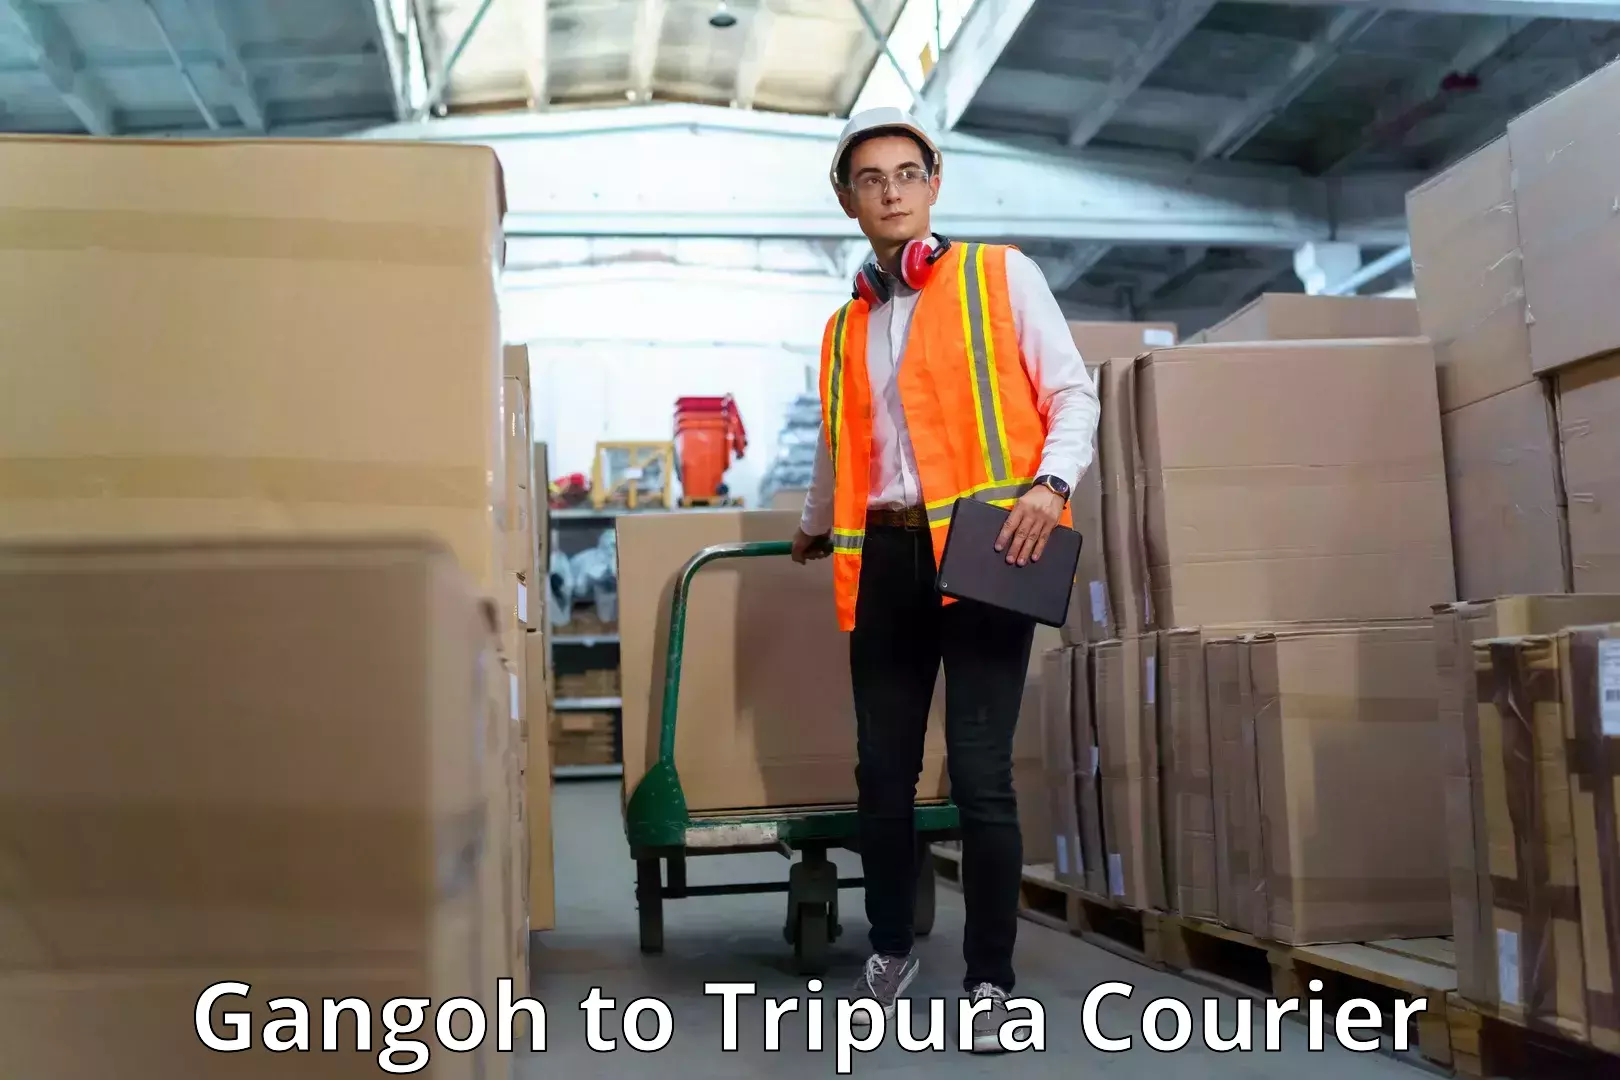 Subscription-based courier Gangoh to Tripura